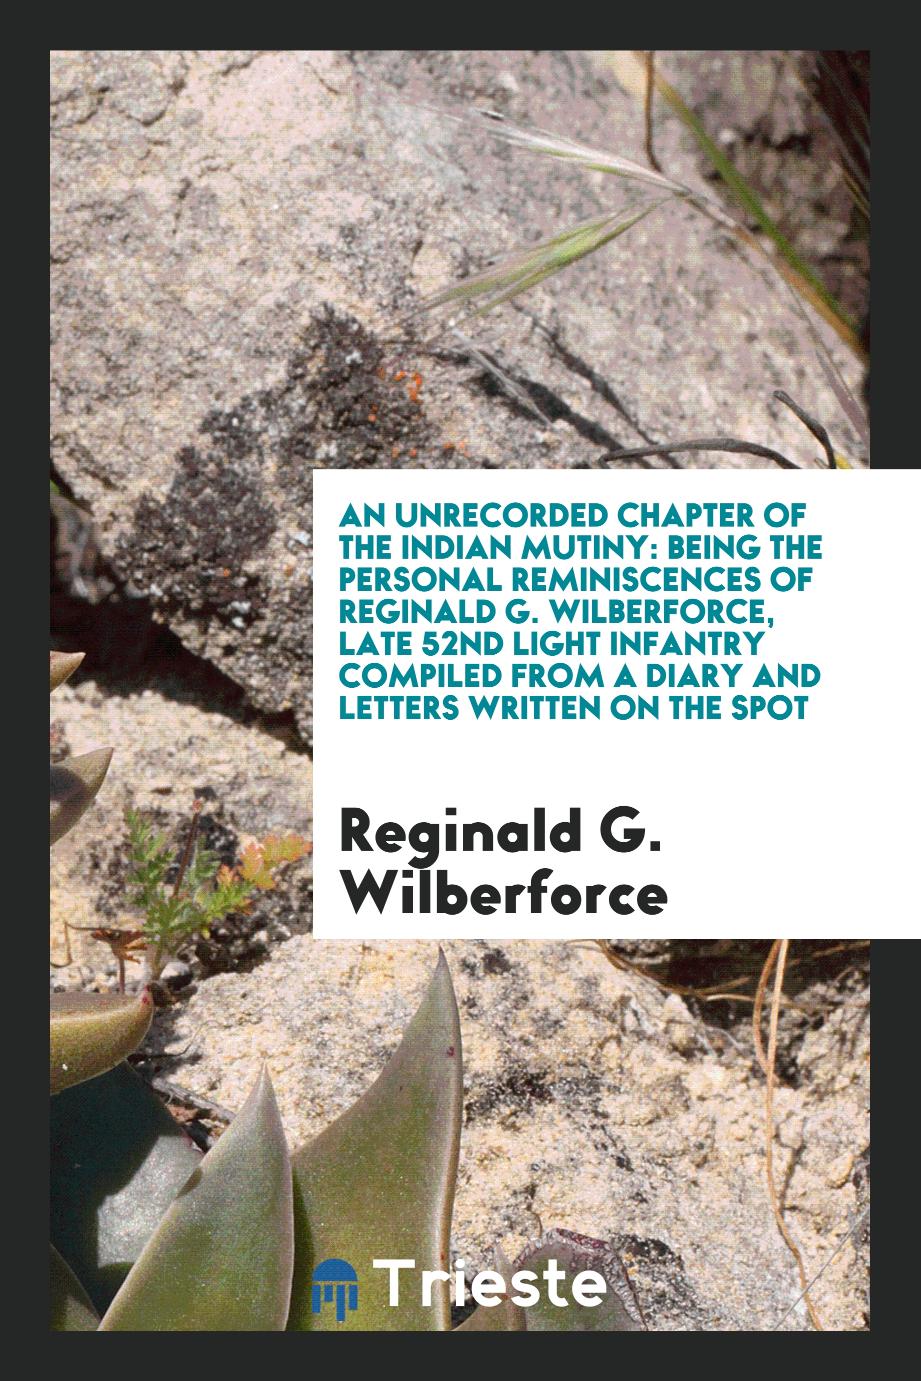 An unrecorded chapter of the Indian Mutiny: being the personal reminiscences of Reginald G. Wilberforce, late 52nd Light Infantry compiled from a diary and letters written on the spot